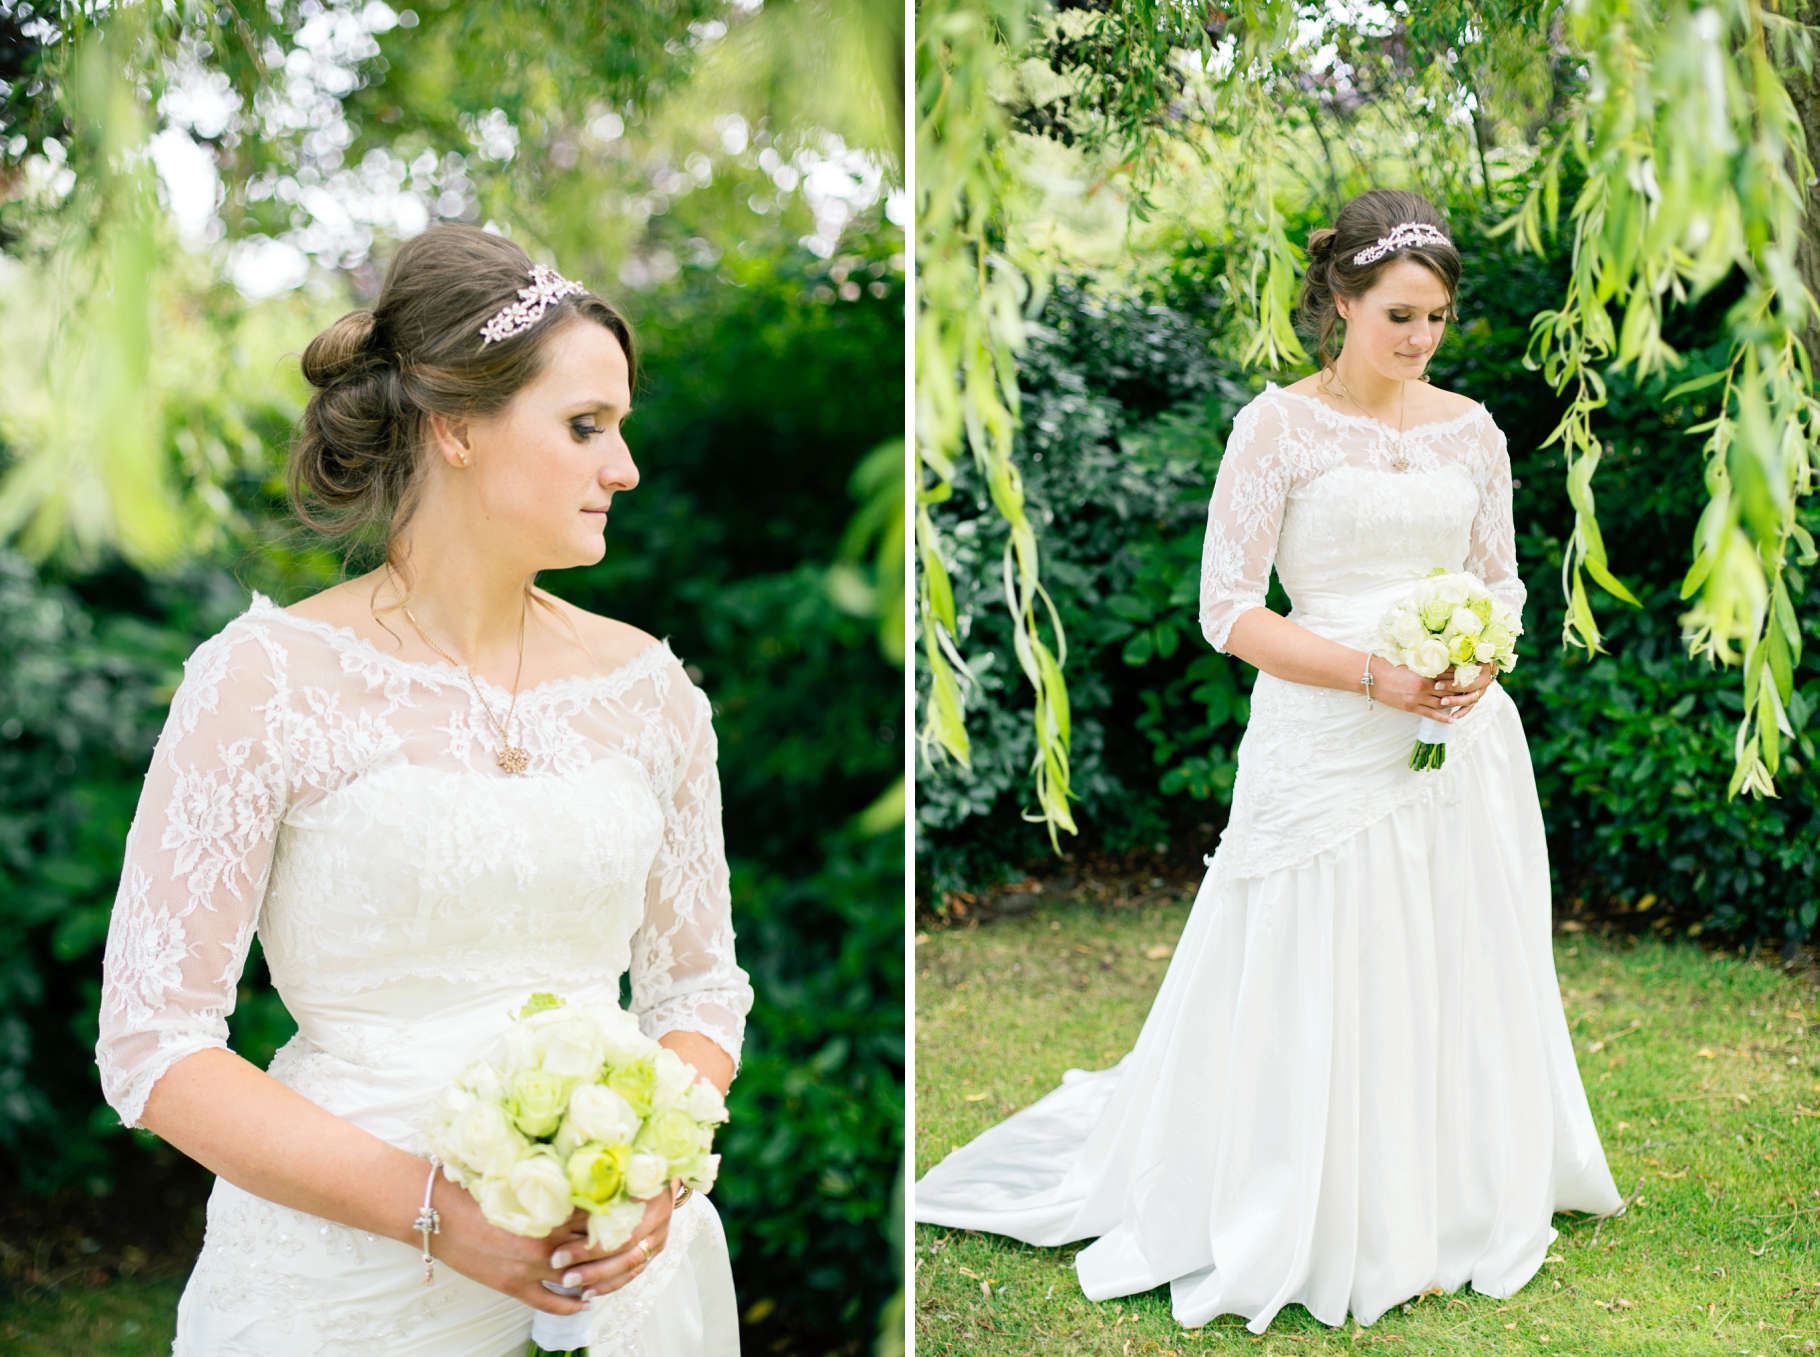 28-Bride-Portraits-Willow-Tree-Bridal-Bouquet-Flowers-Roses-White-Green-International-Photographer-England-Bristol-Wedding-Photography-by-Betty-Elaine